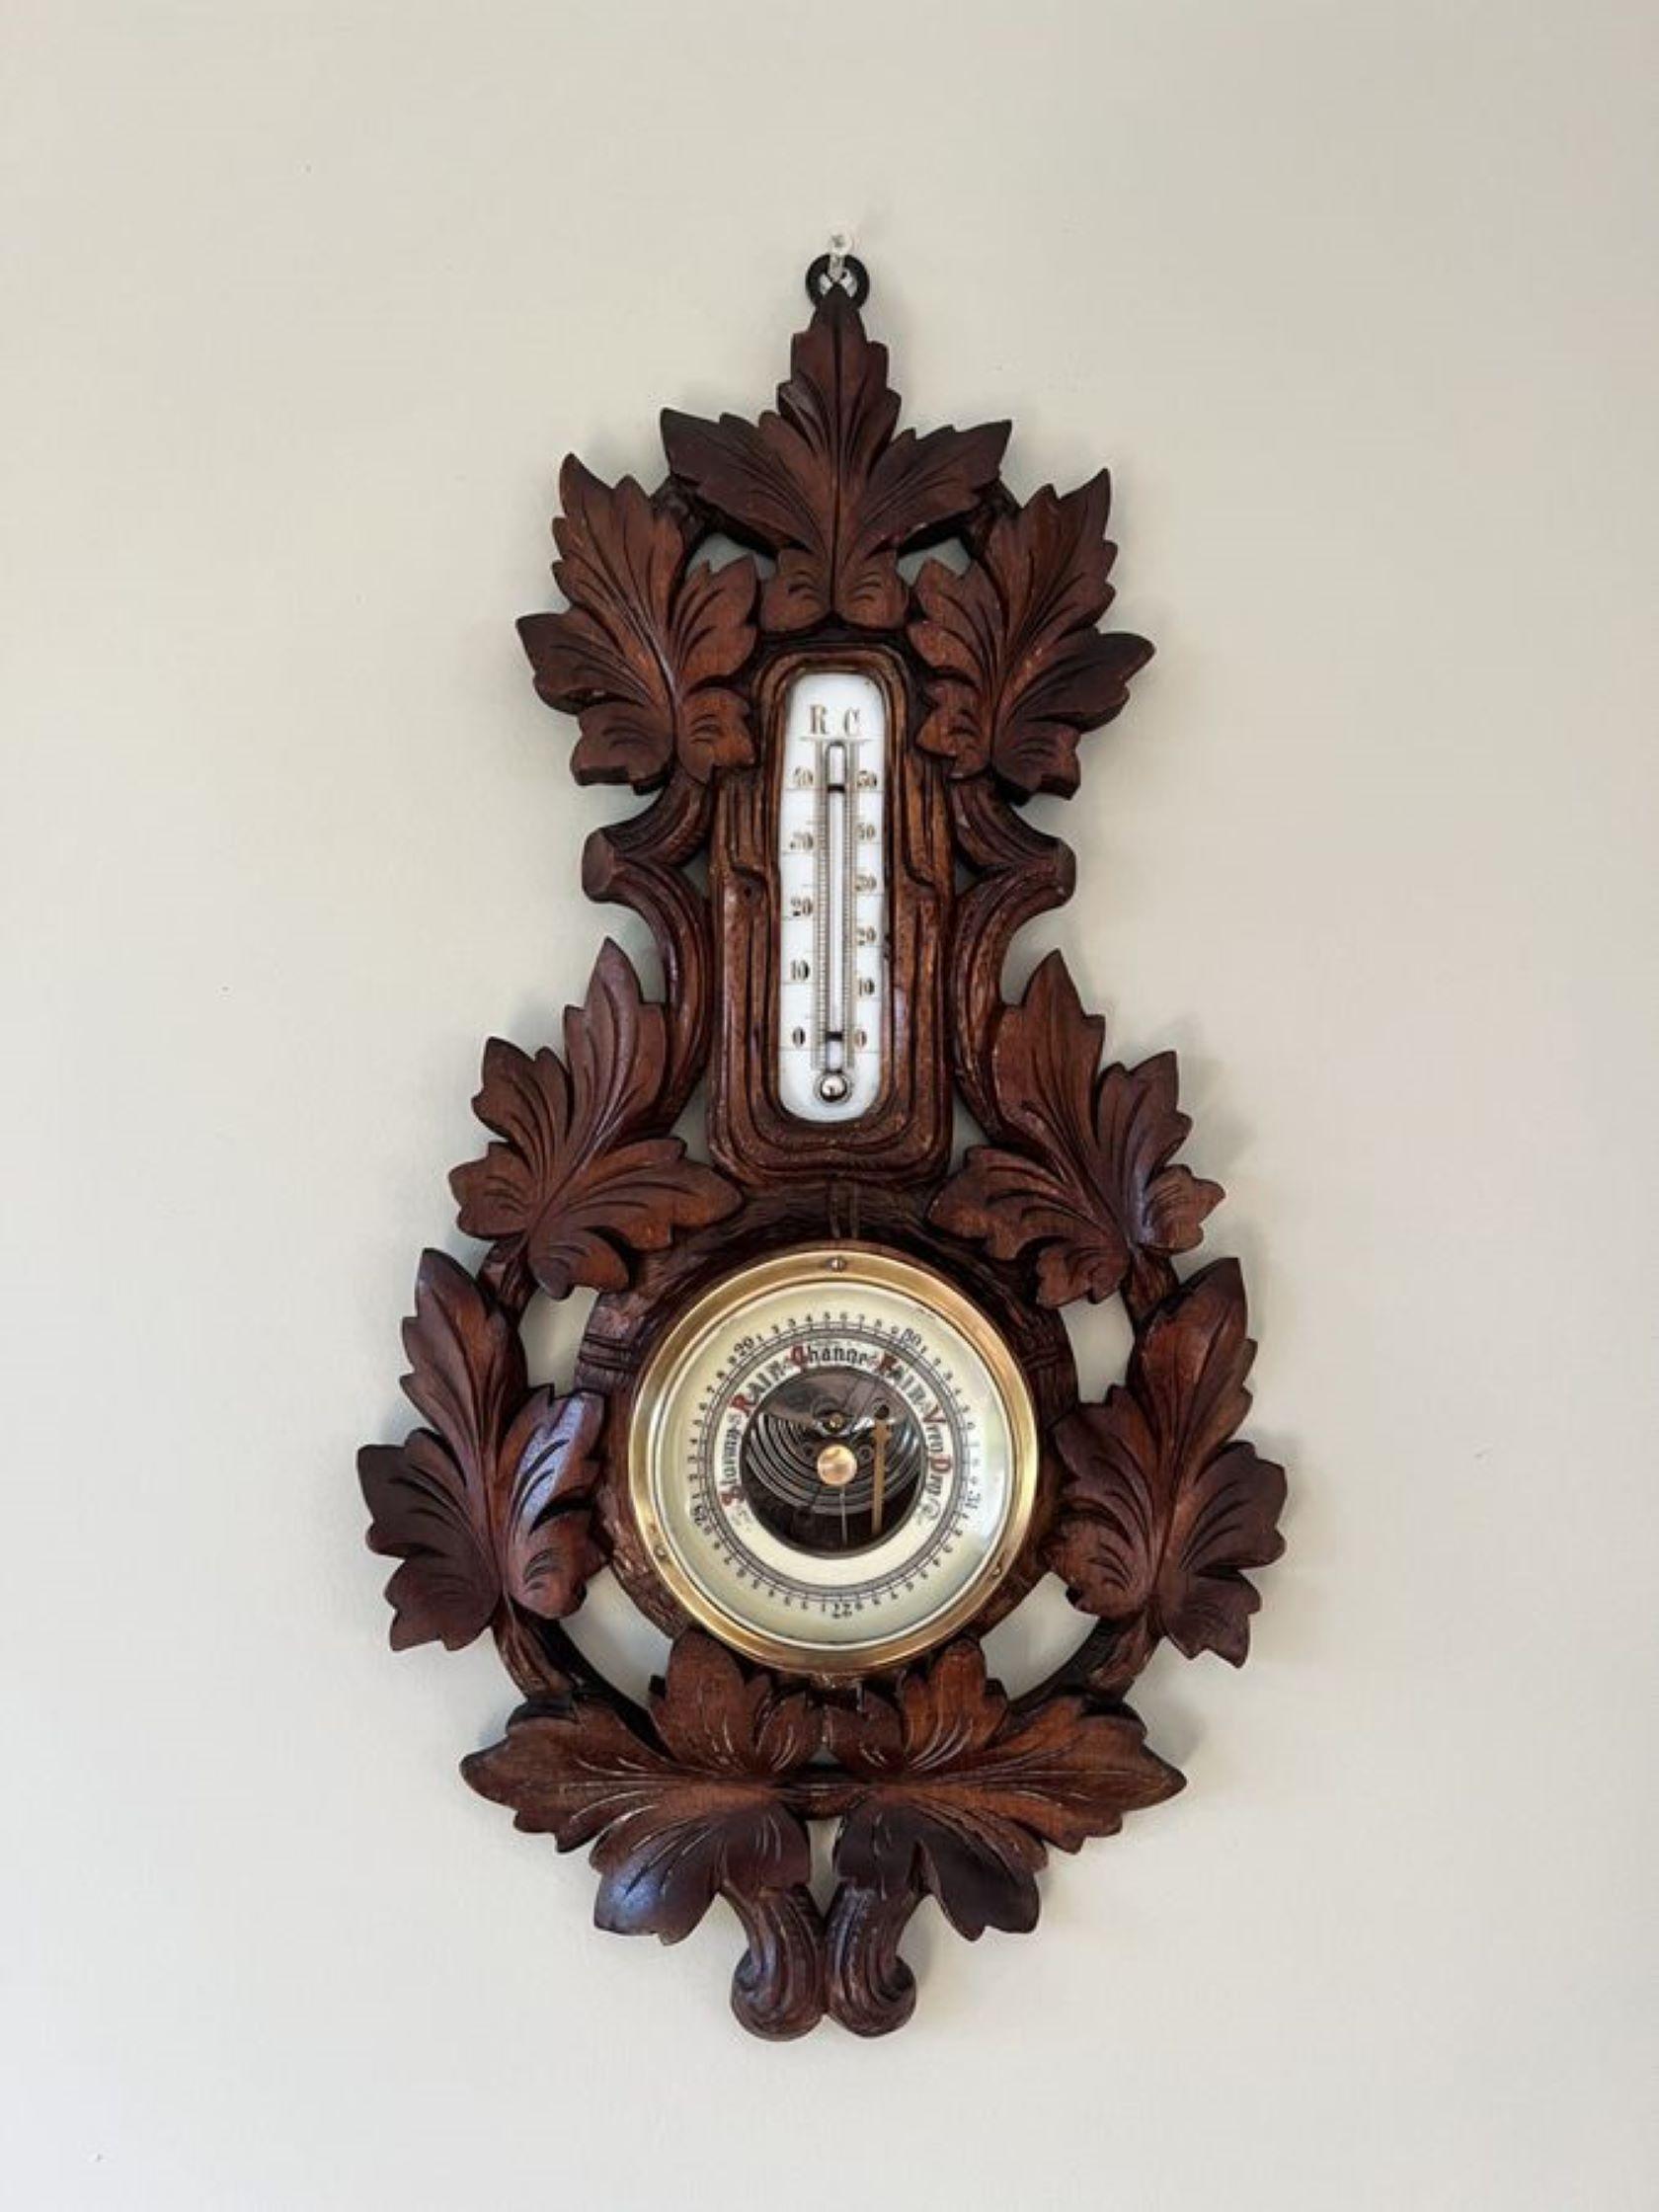 Stunning quality antique Victorian Black Forest aneroid barometer having a fantastic quality antique Victorian Black Forest barometer with a quality carved walnut case with leaves surrounding the barometer with a circular dial, the original hands